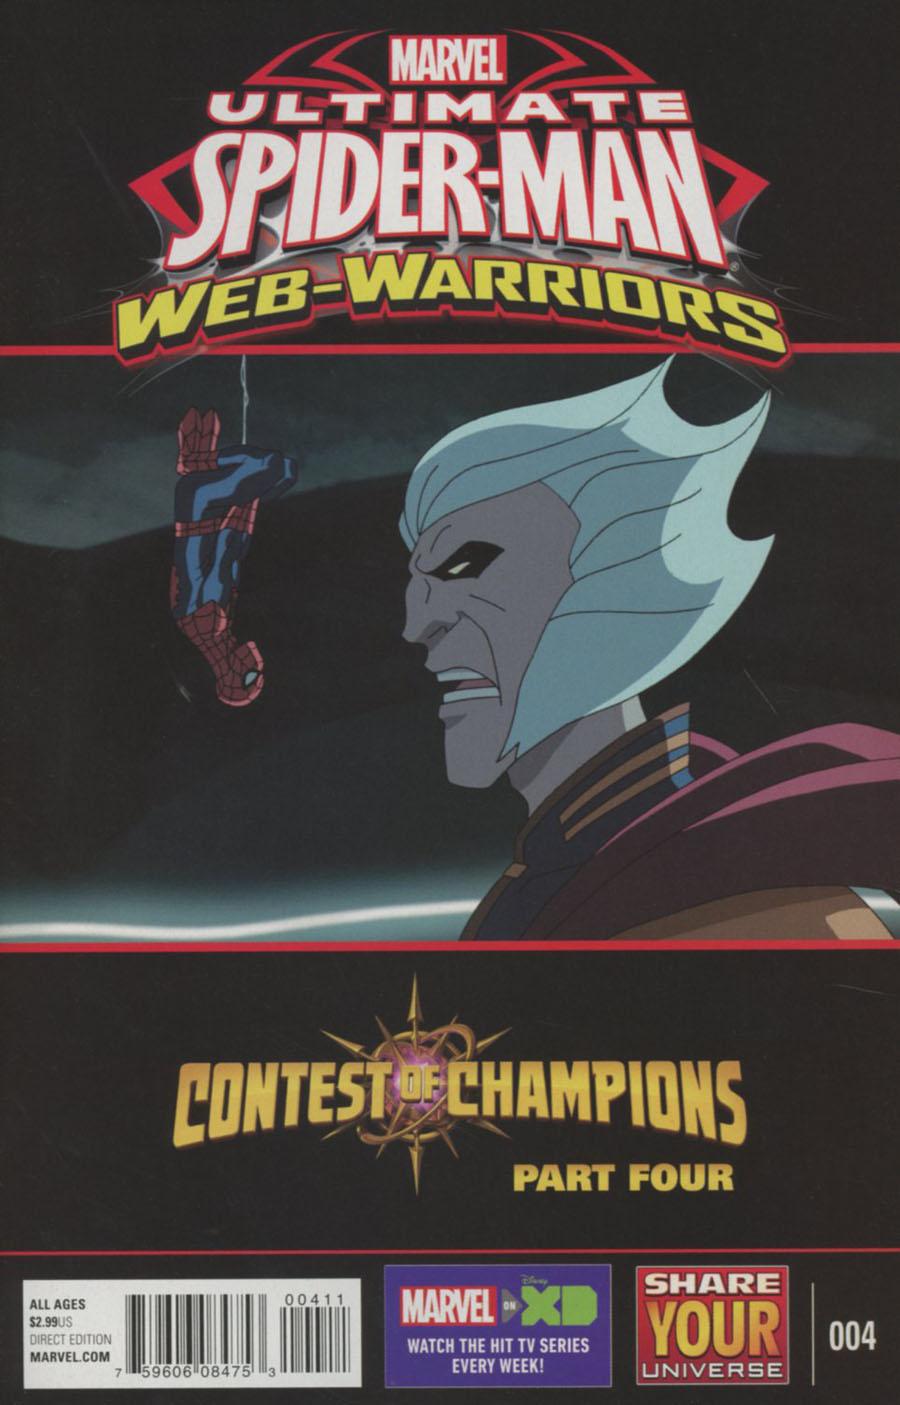 Marvel Universe Ultimate Spider-Man Contest Of Champions Vol. 1 #4